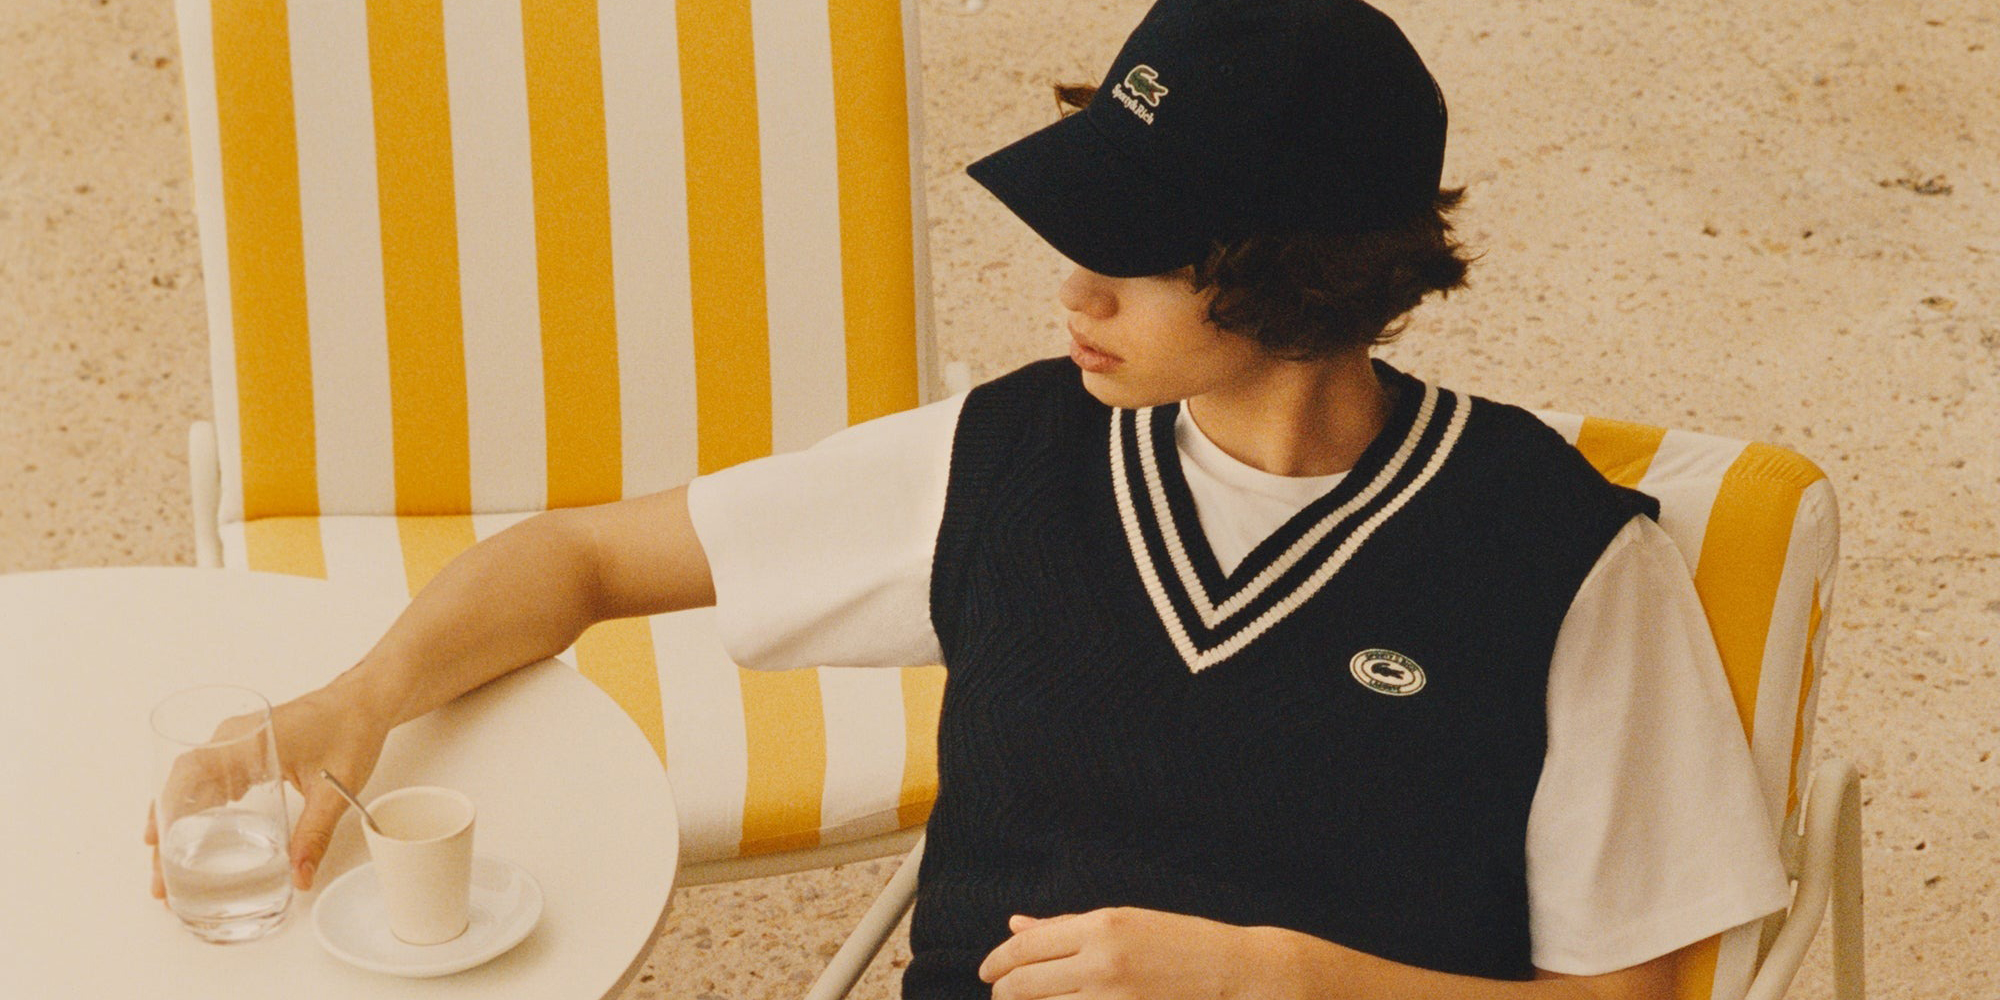 LACOSTE X SPORTY & RICH CAPSULE COLLECTION